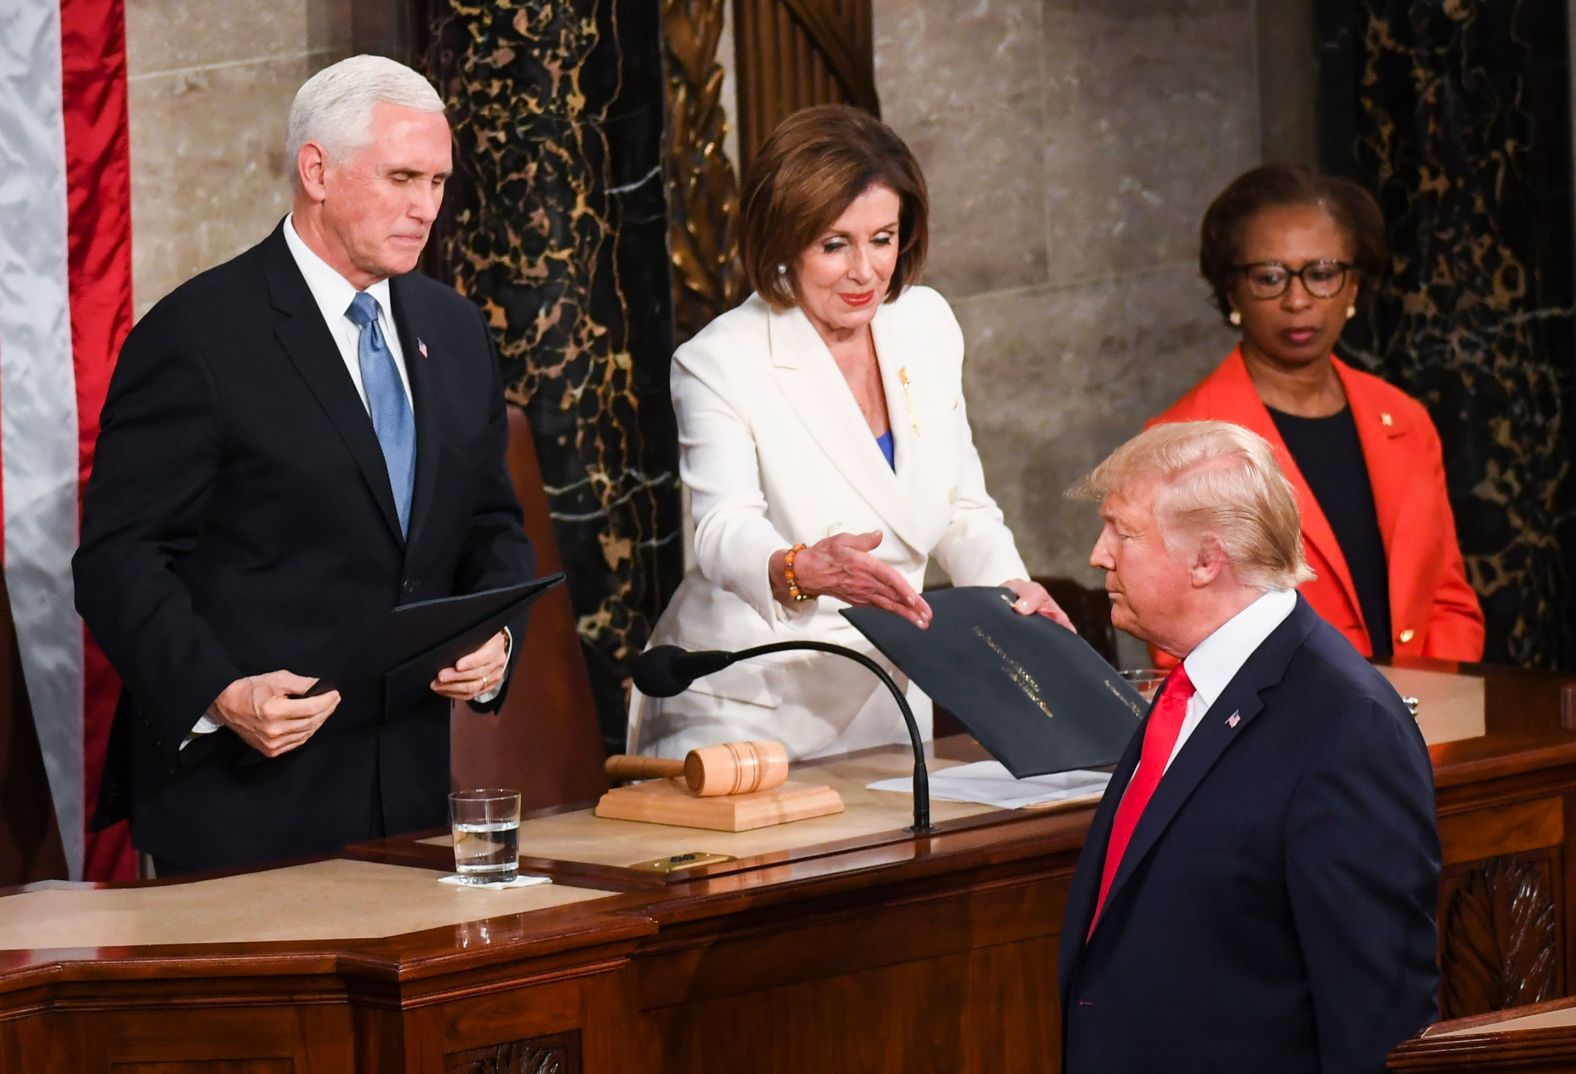 Pelosi reaches out to shake Trump's hand after being handed a copy of the speech. He turned away and left her hanging. The two haven't spoken in months.